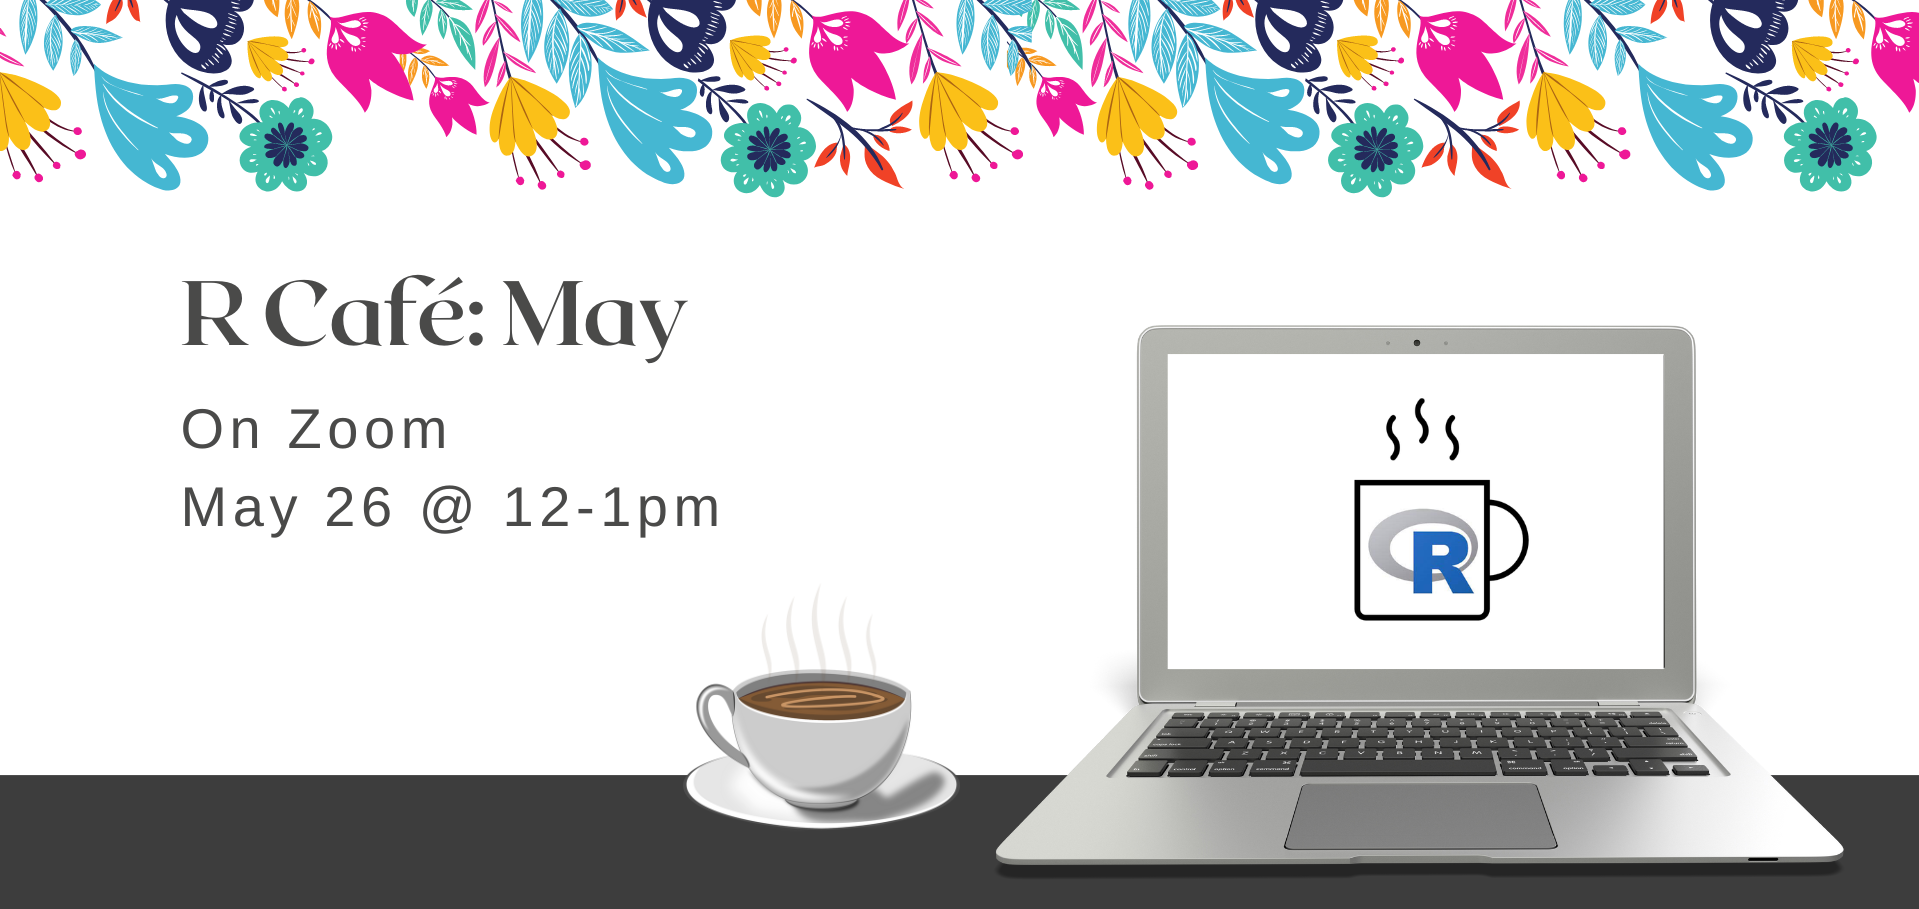 Laptop with R Café logo beside a cup of coffee and background of bright flowers with text: R Café May. On Zoom. May 26 at 12 to 1 pm.